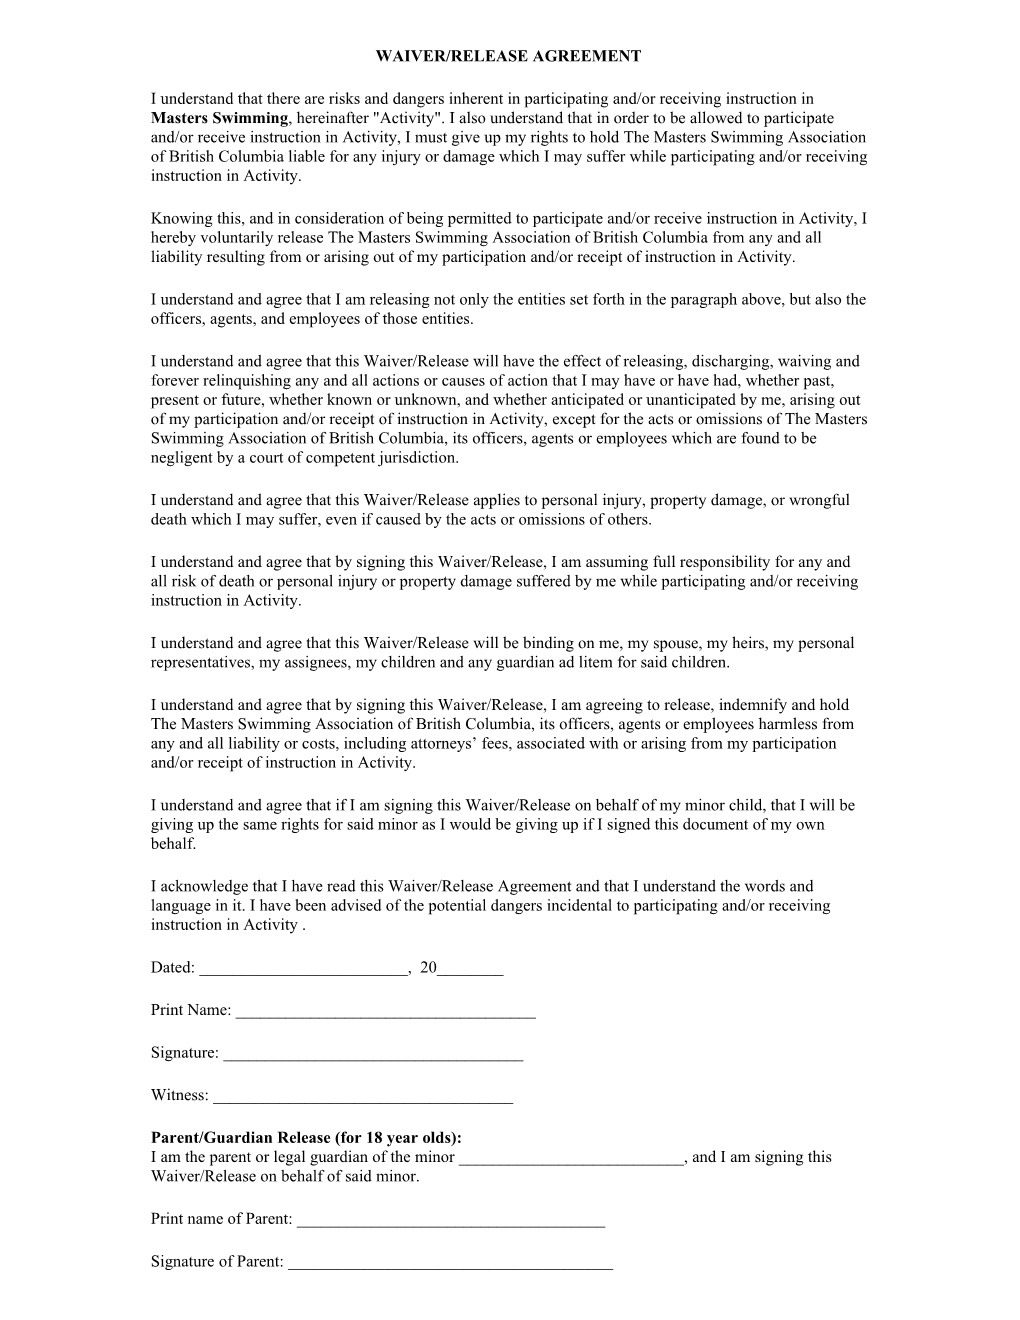 Waiver/Release Agreement